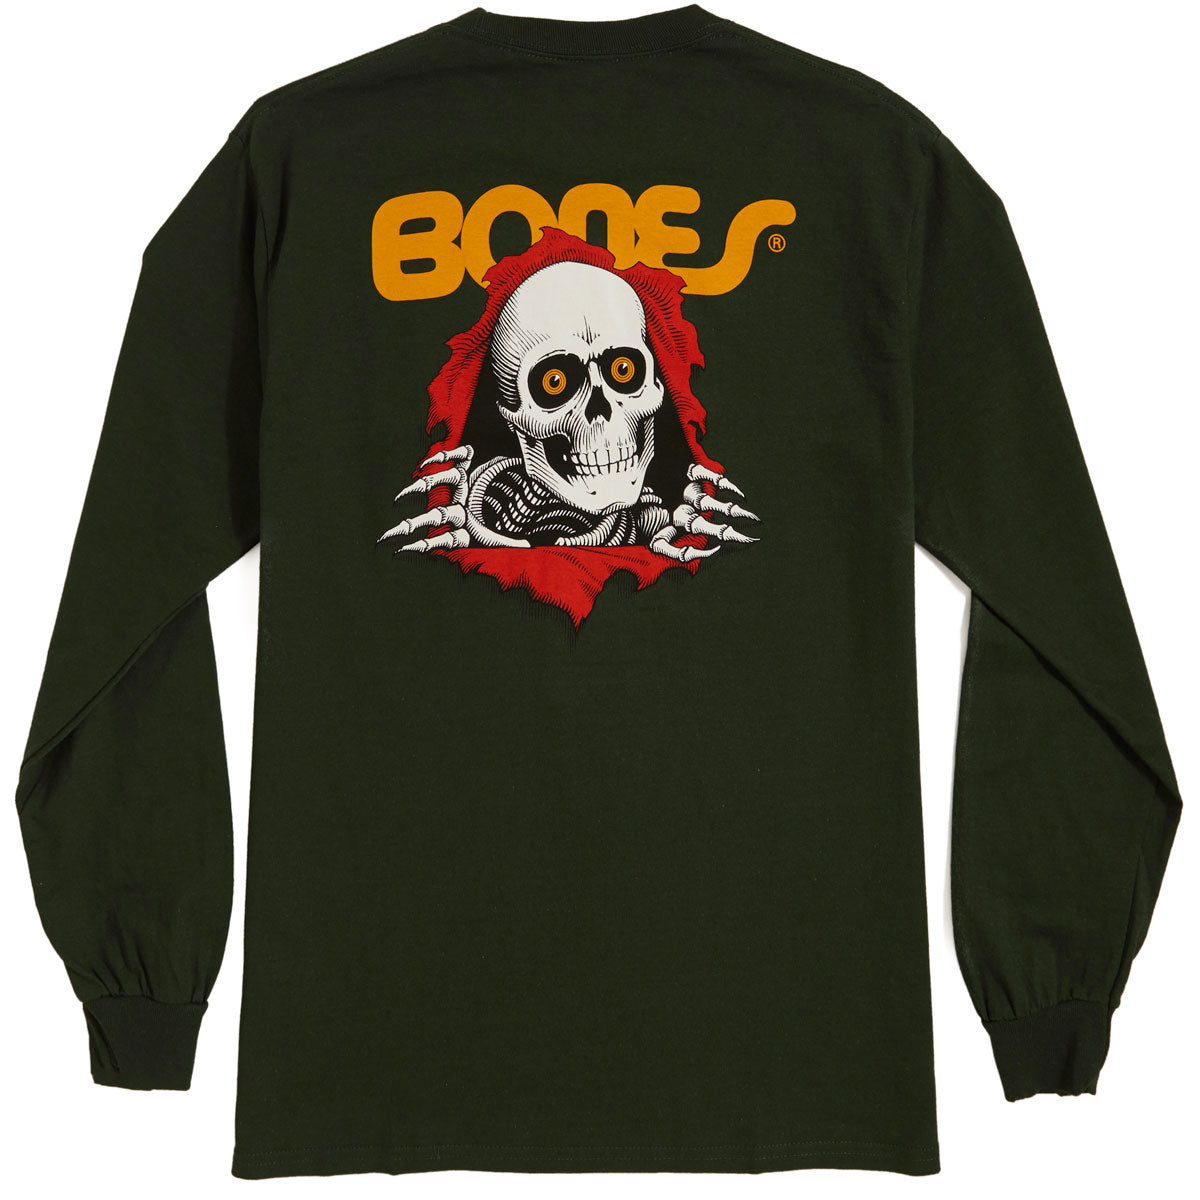 Powell-Peralta Ripper Long Sleeve T-Shirt - Forest Green image 2